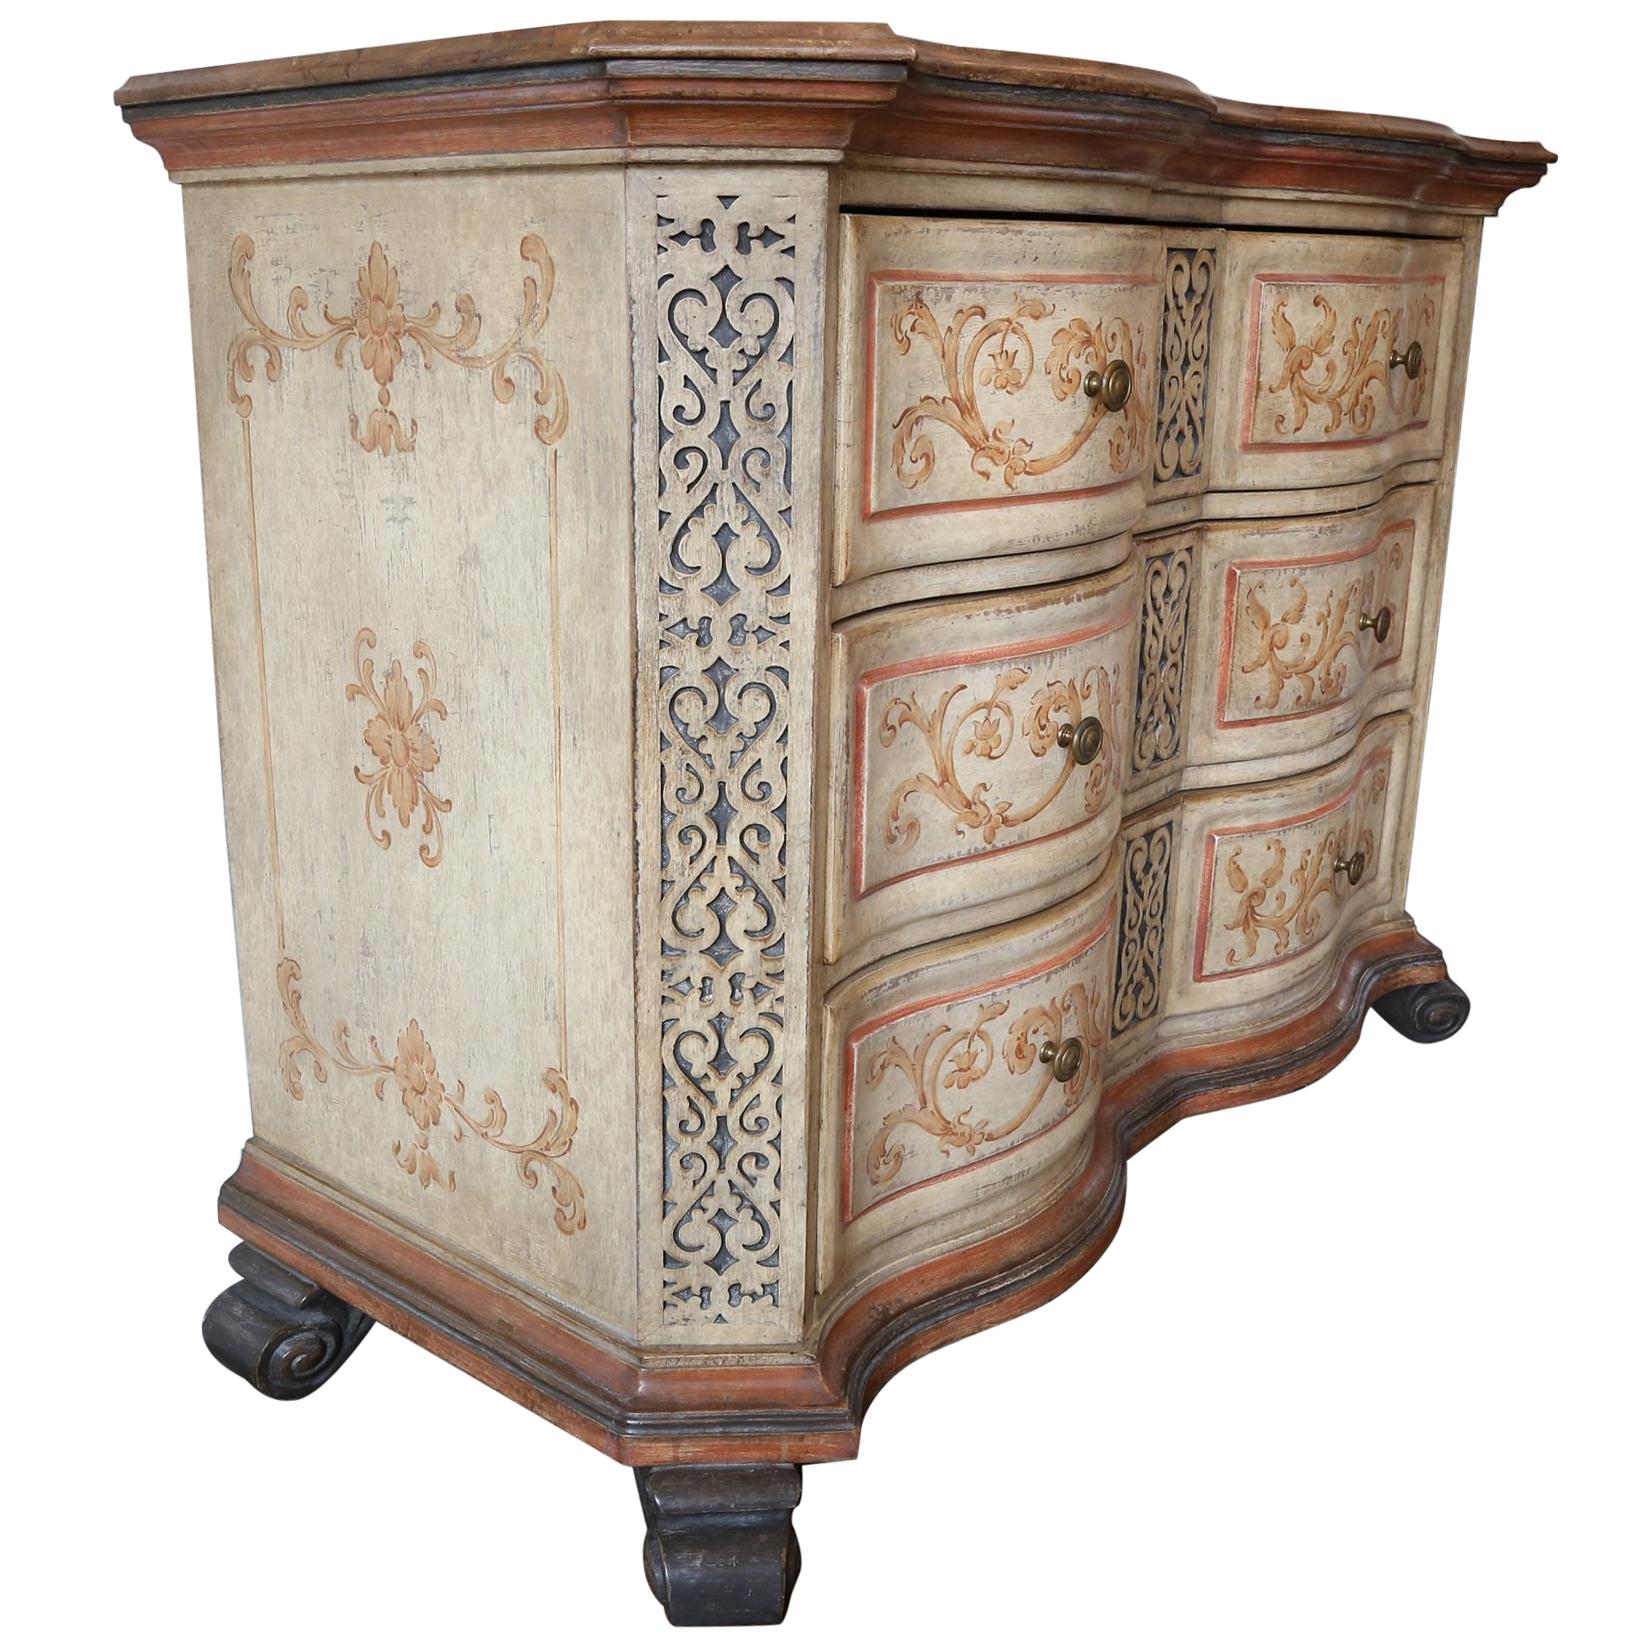 Hand-Painted 18th Century Style Chest Design For Sale